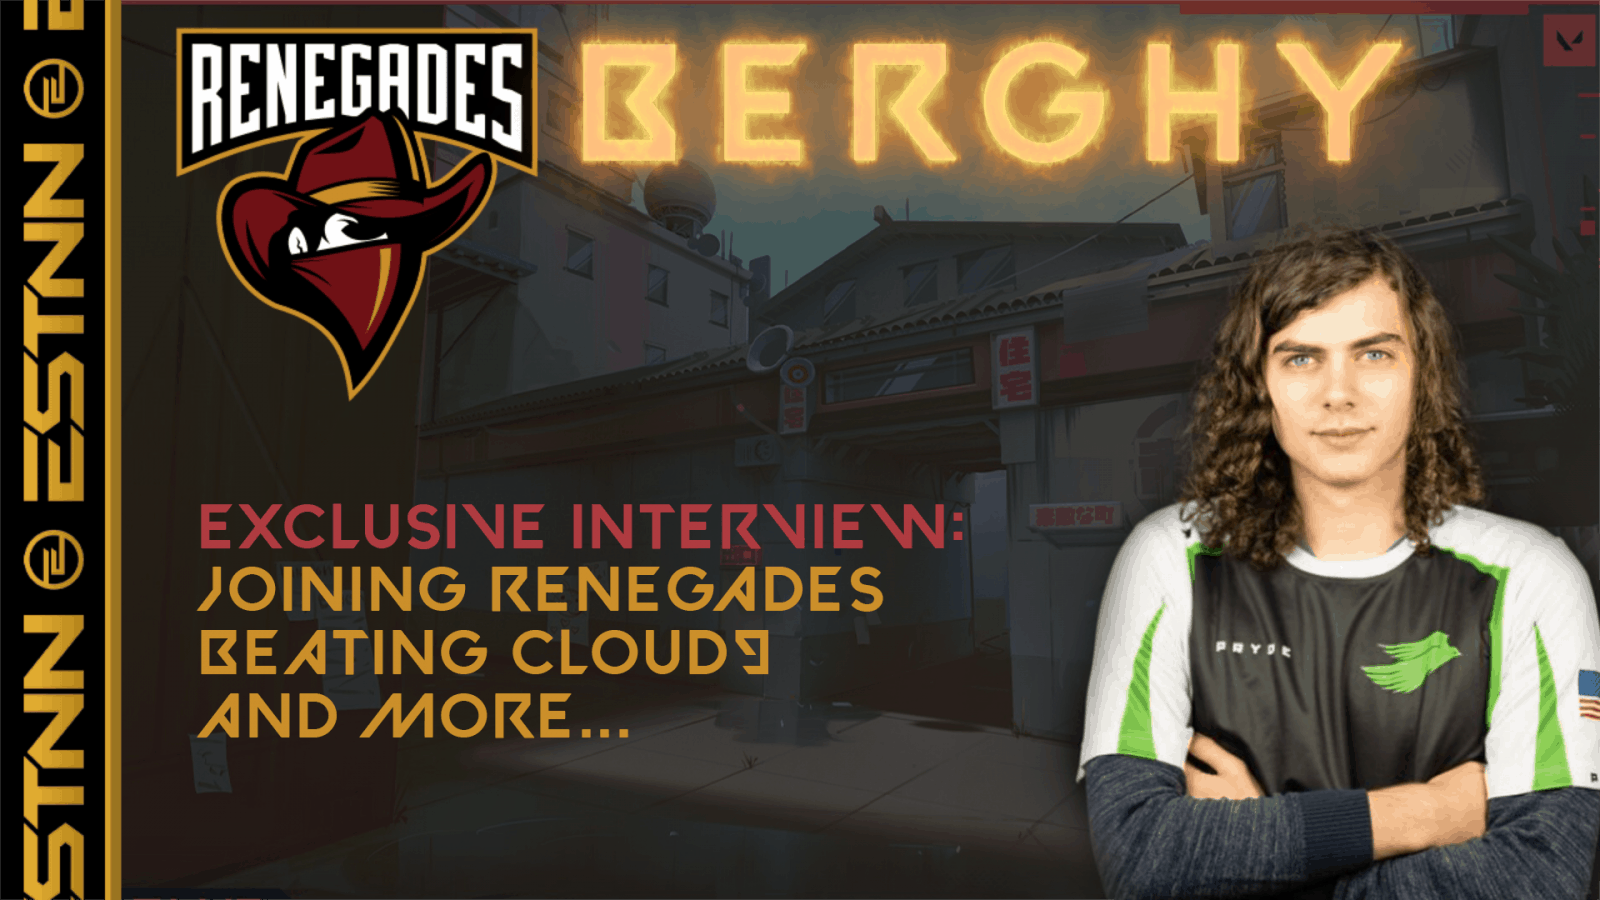 Exclusive Valorant Interview with Renegades’ Berghy